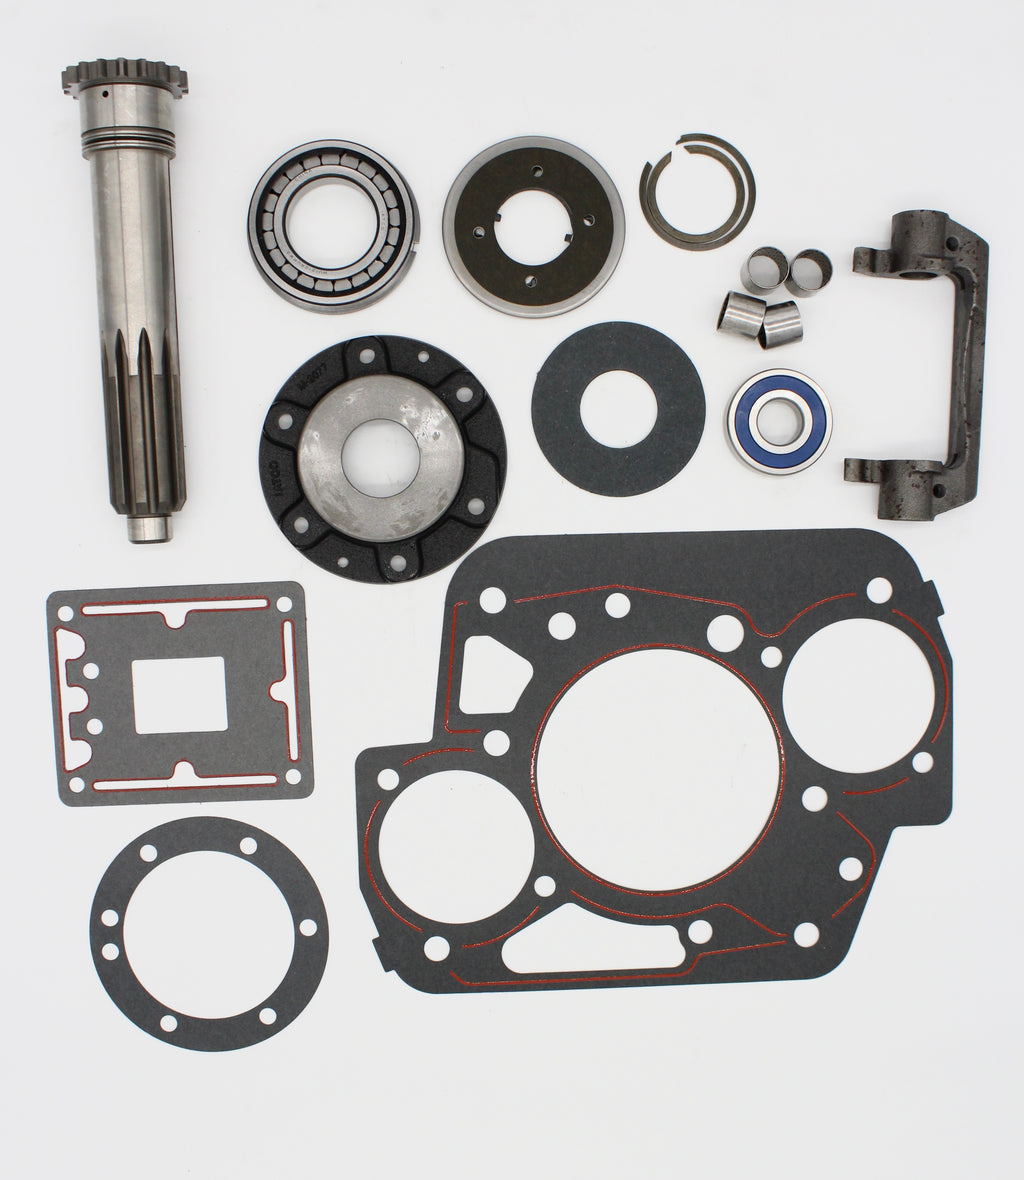 PDI Clutch Install Kit for RTLO Transmission